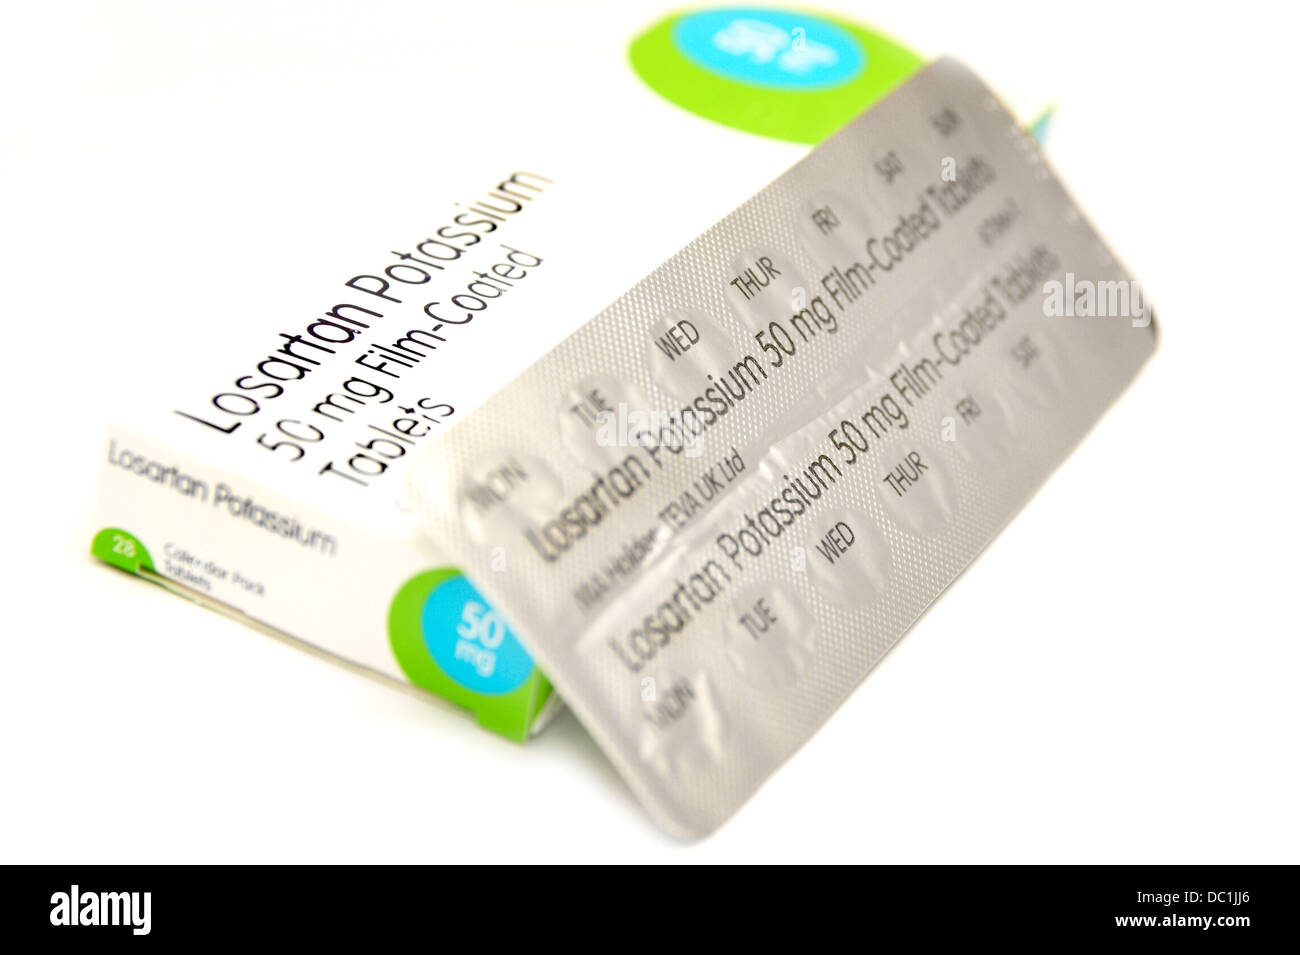 Losartan Potassium tablets used for lowering high blood pressure Stock  Photo - Alamy